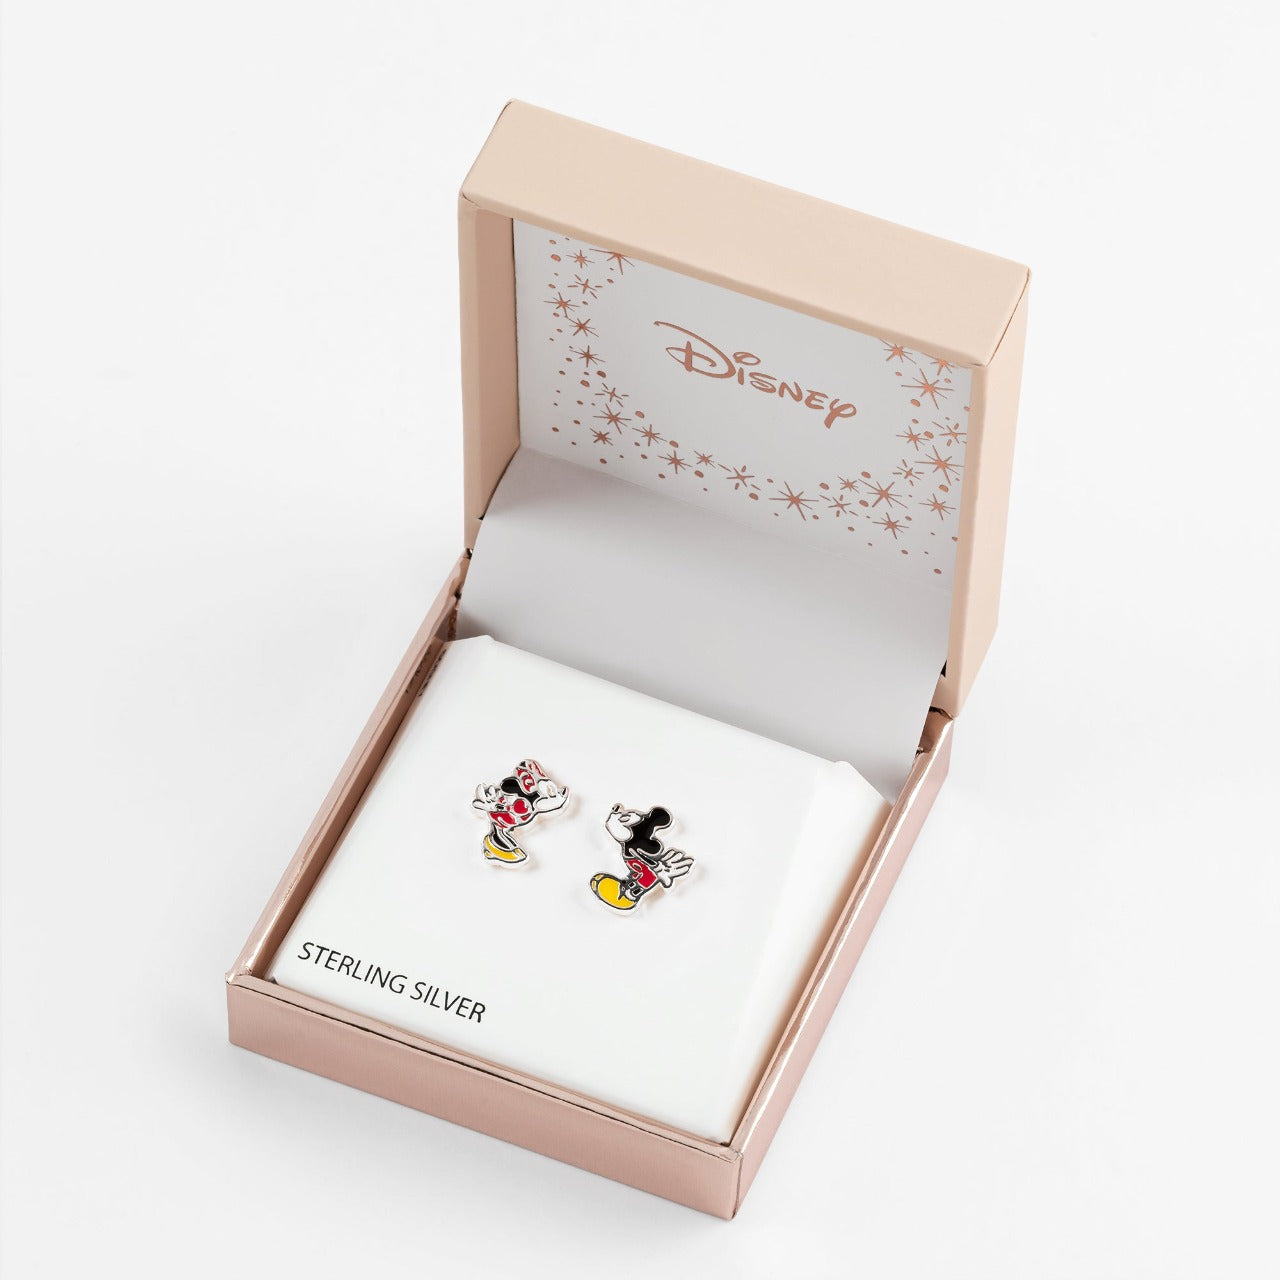 Peers Hardy Disney Mickey and Minnie Mouse Mismatched Stud Earrings  This classic adorable pair has a unique mismatched quality of Mickey and Minnie Mouse Kissing, one in Mickeys shape one in Minnies shape leaning into a kiss and giving a playful twist to this classic accessory.  Trendy and fashionable design, the Disney Mickey & Minnie Mouse kissing famous pose Sterling Silver Stud Earrings add a chic, fun touch to any outfit.